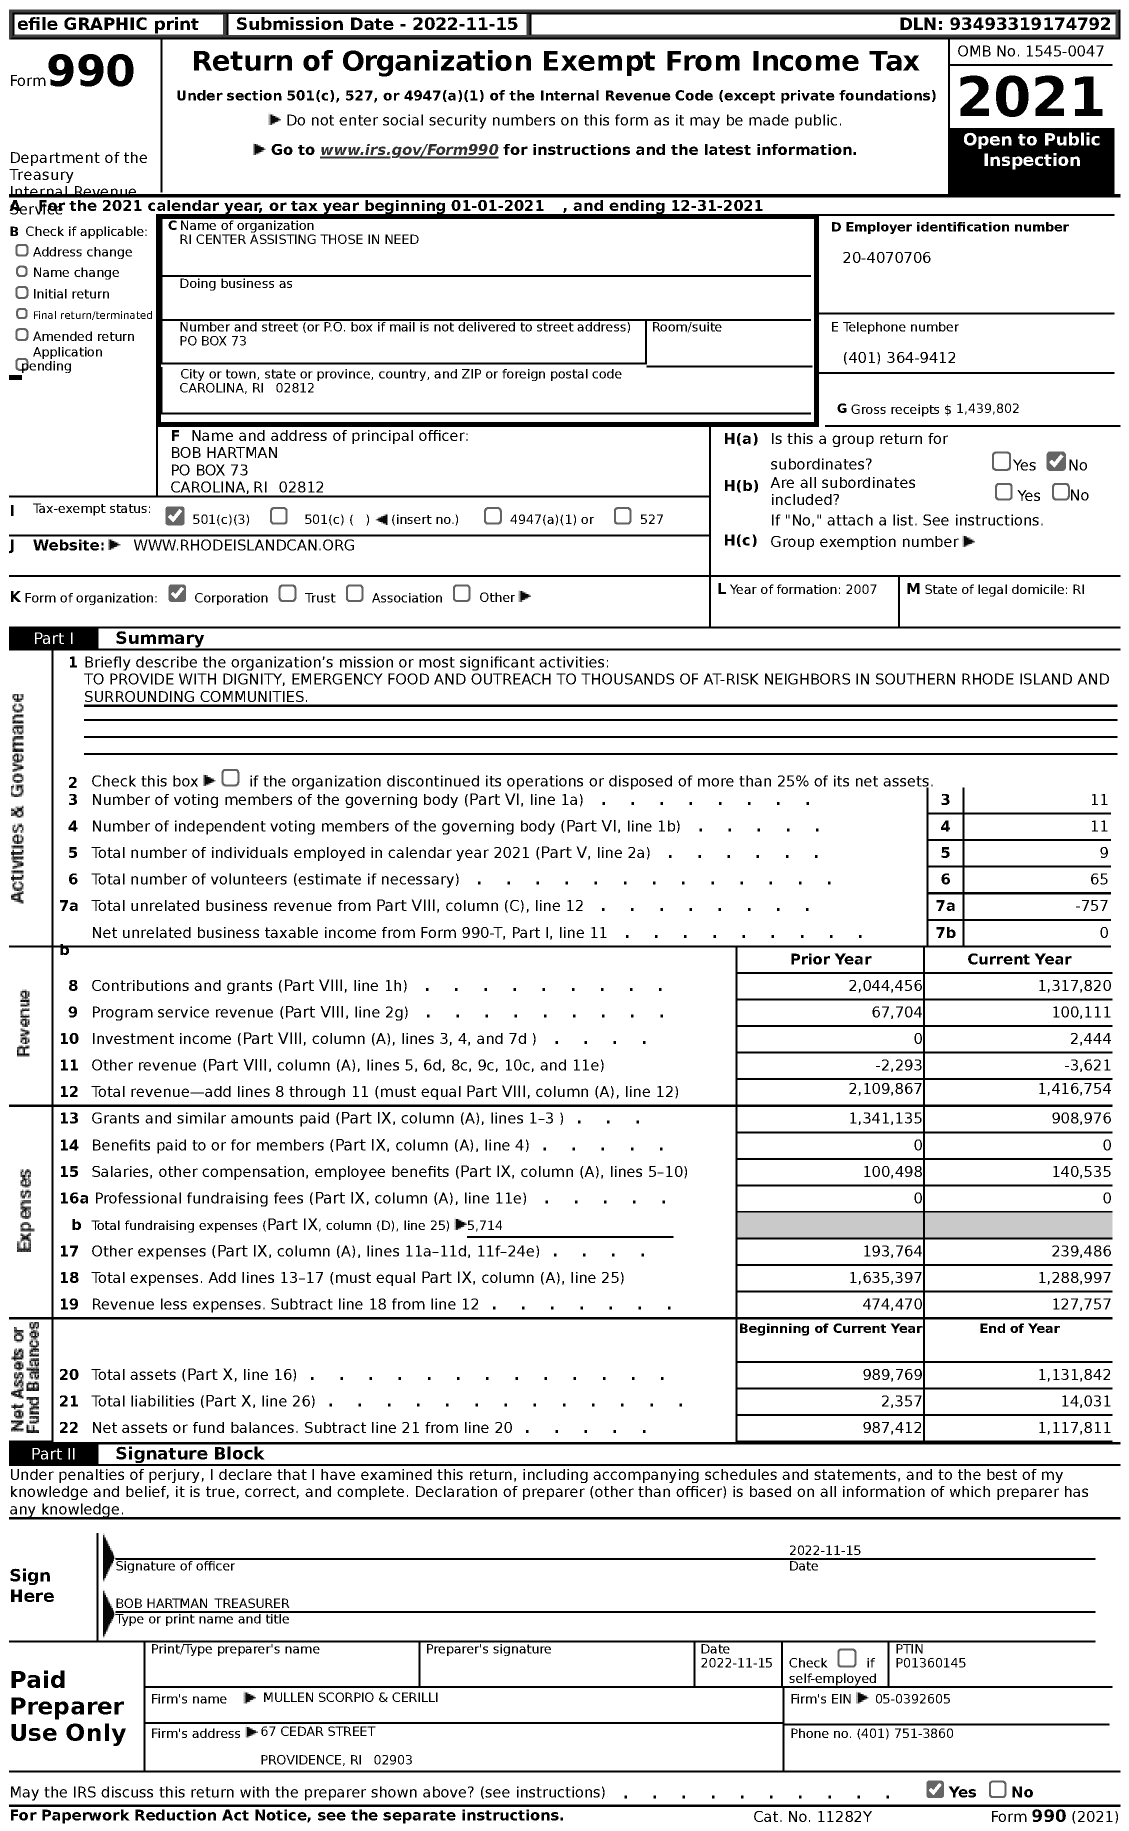 Image of first page of 2021 Form 990 for Ri Center Assisting Those in Need